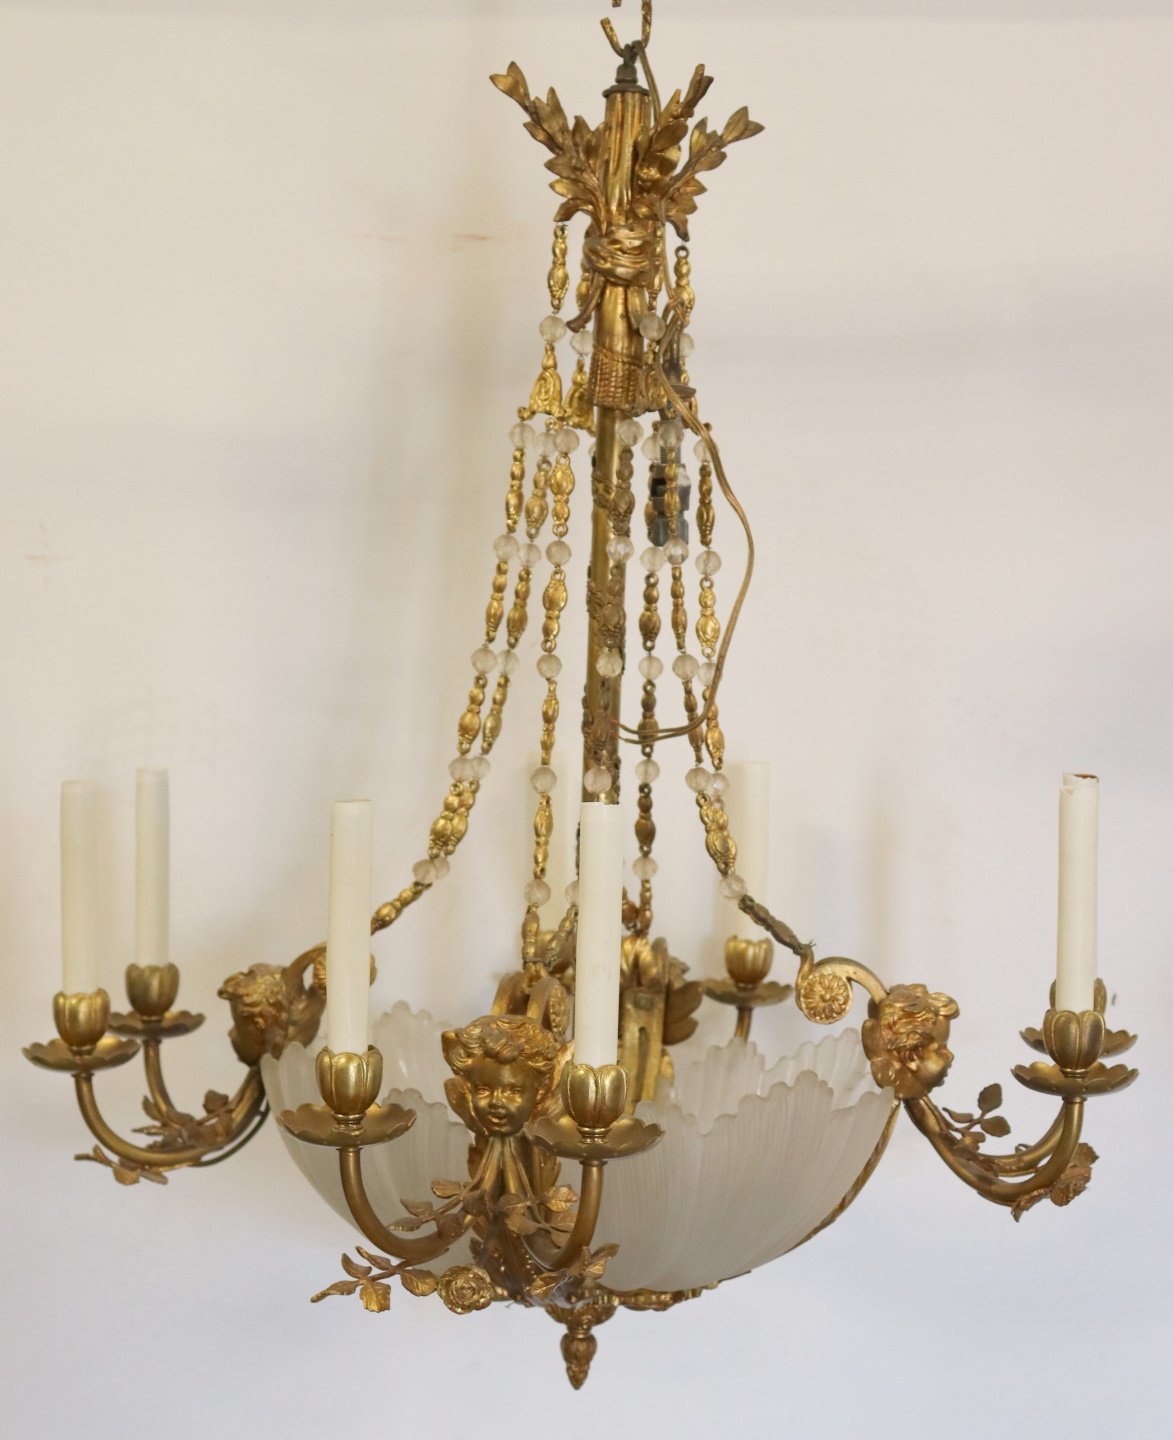 ANTIQUE GILT BRONZE & FROSTED GLASS